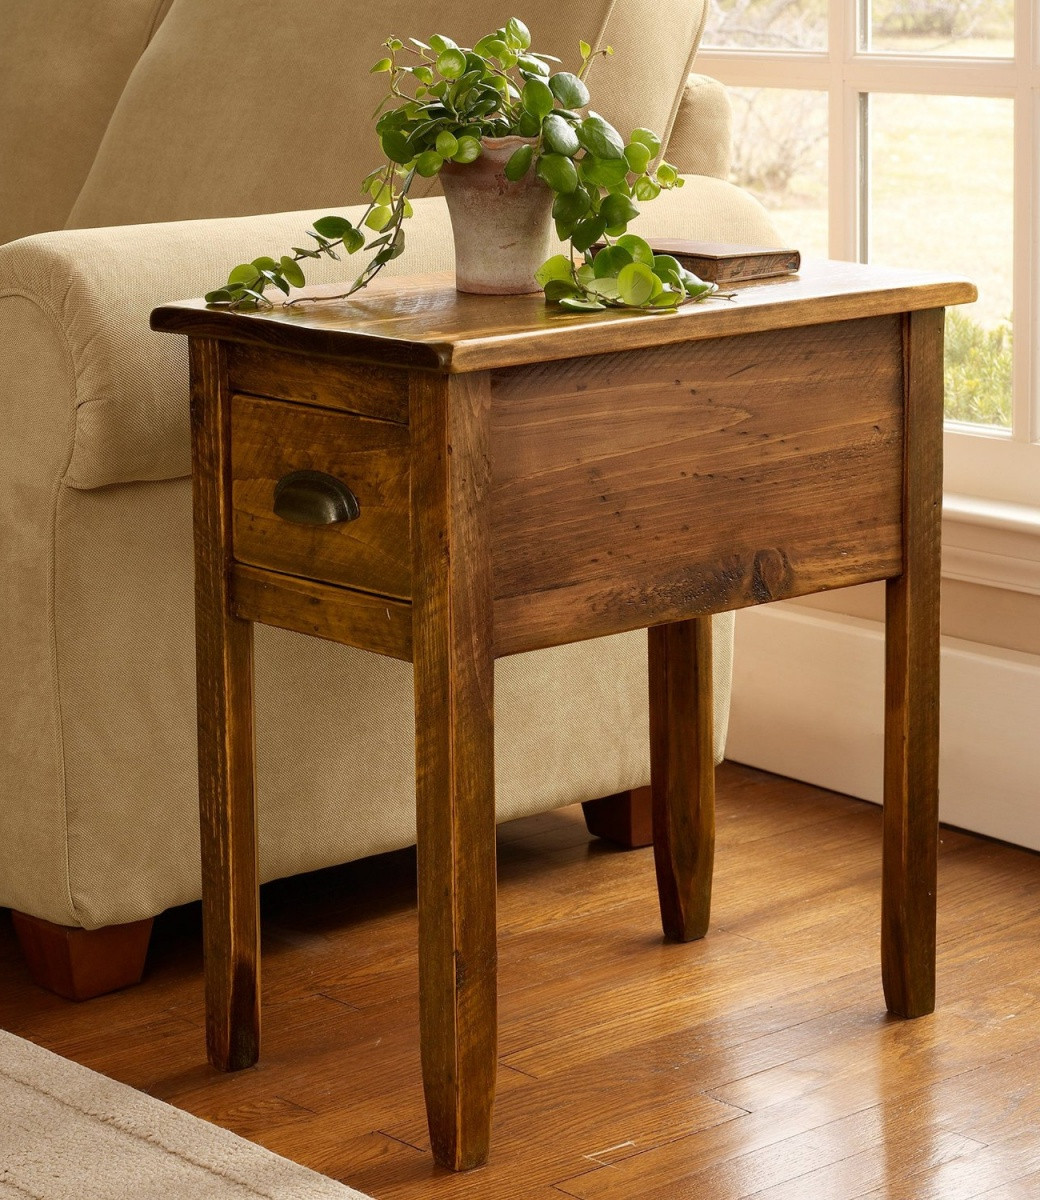 Side Table for Living Room Lovely Side Tables for Living Room Ideas for Small Spaces